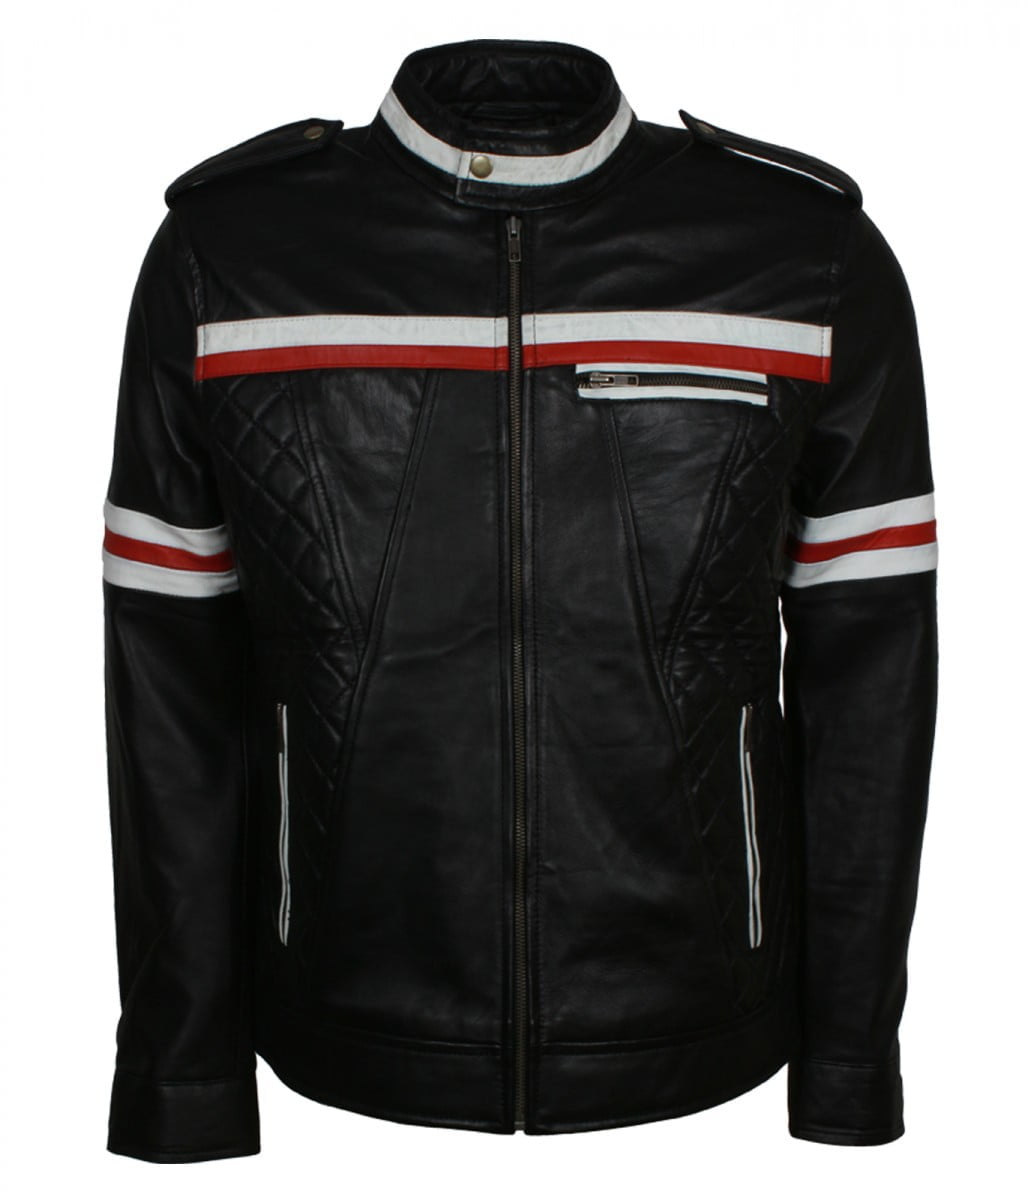 Red Striped Black Motorcyle Leather Jacket - Real Leather Jackets